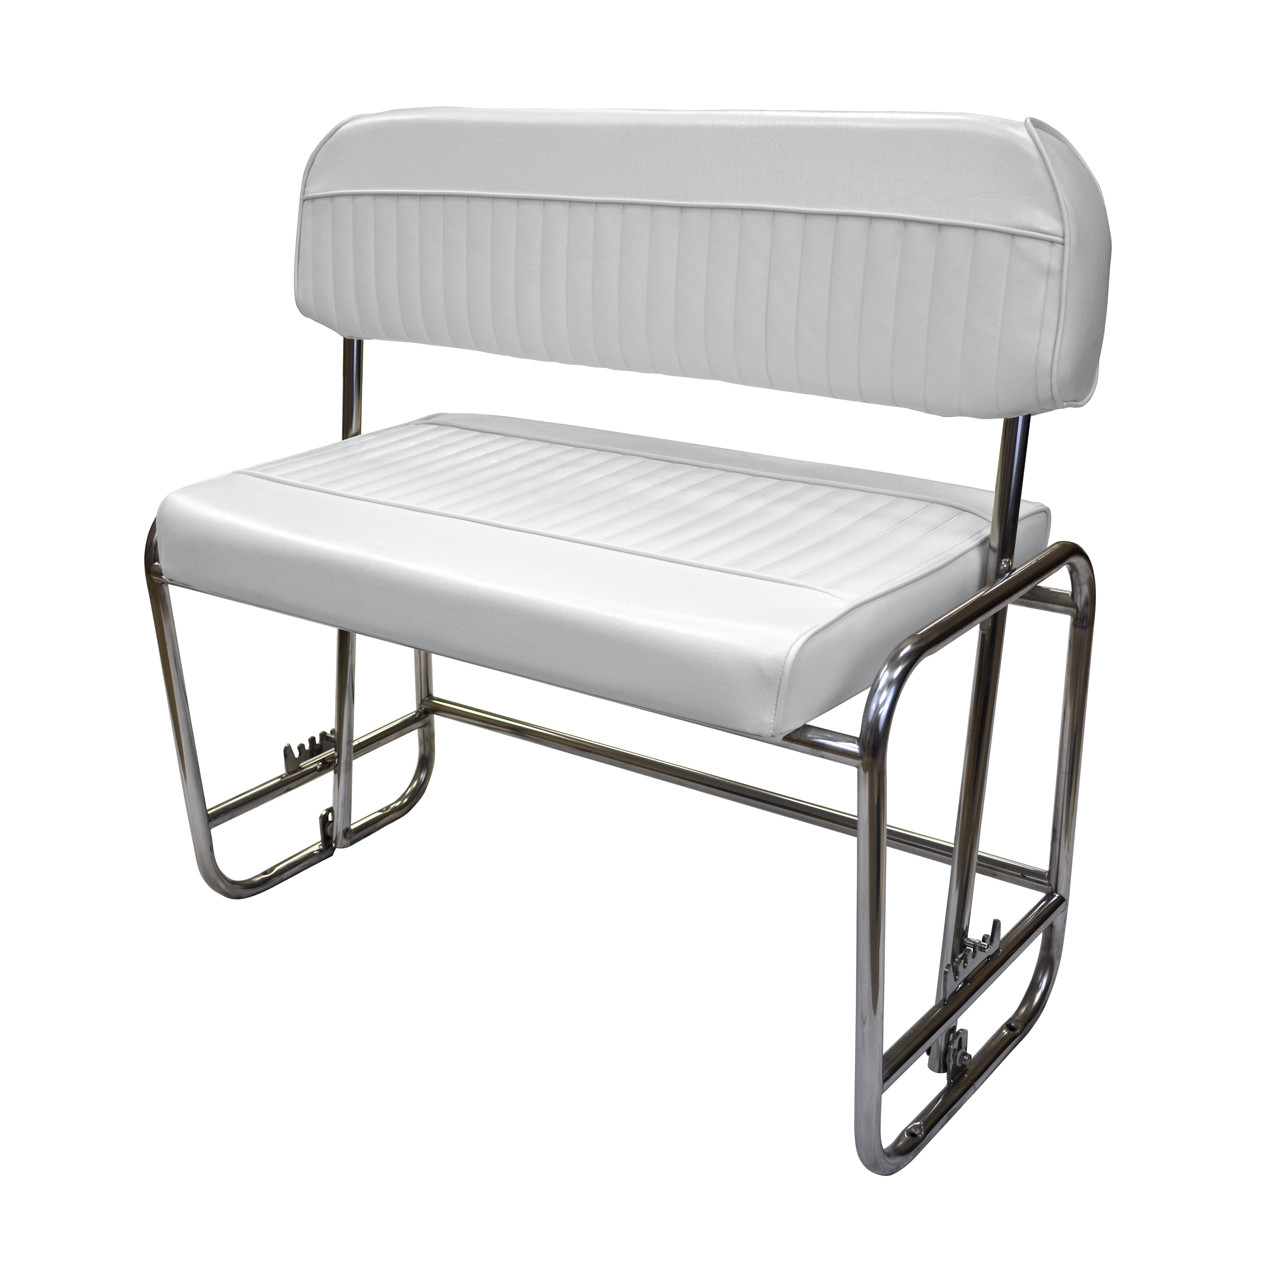 https://cdn11.bigcommerce.com/s-uprkx/images/stencil/1280x1280/products/50672/257693/wise-boat-cooler-seat-8WD155P-brite-white__19914.1423240466.jpg?c=2